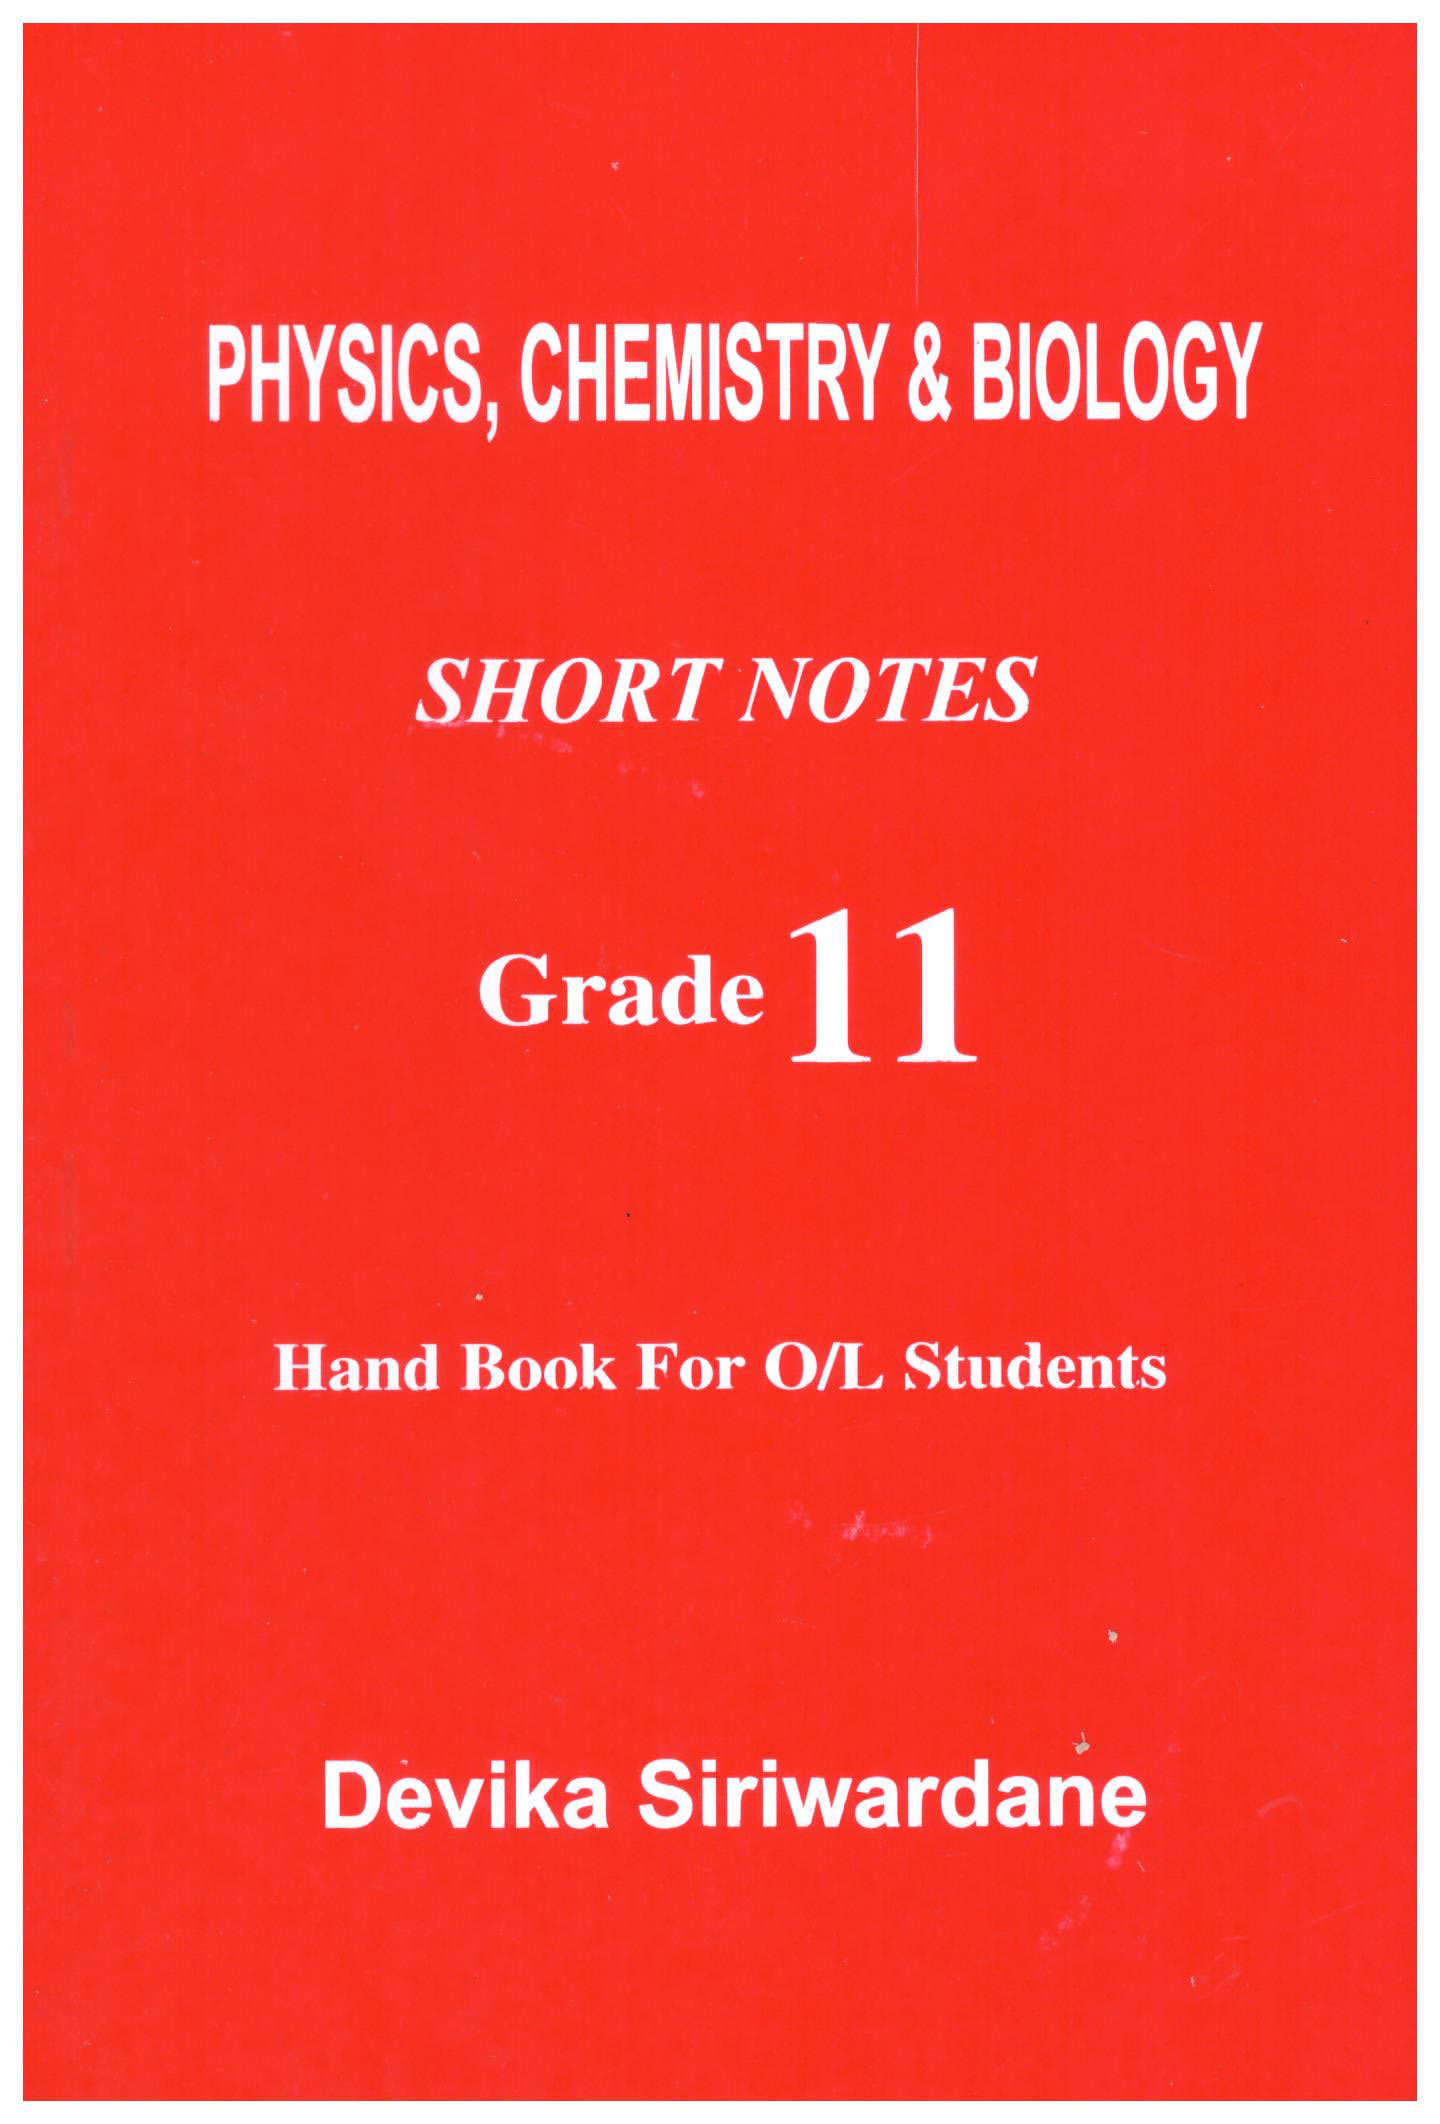 Physics Chemistry and Biology Short Notes Grade 11 